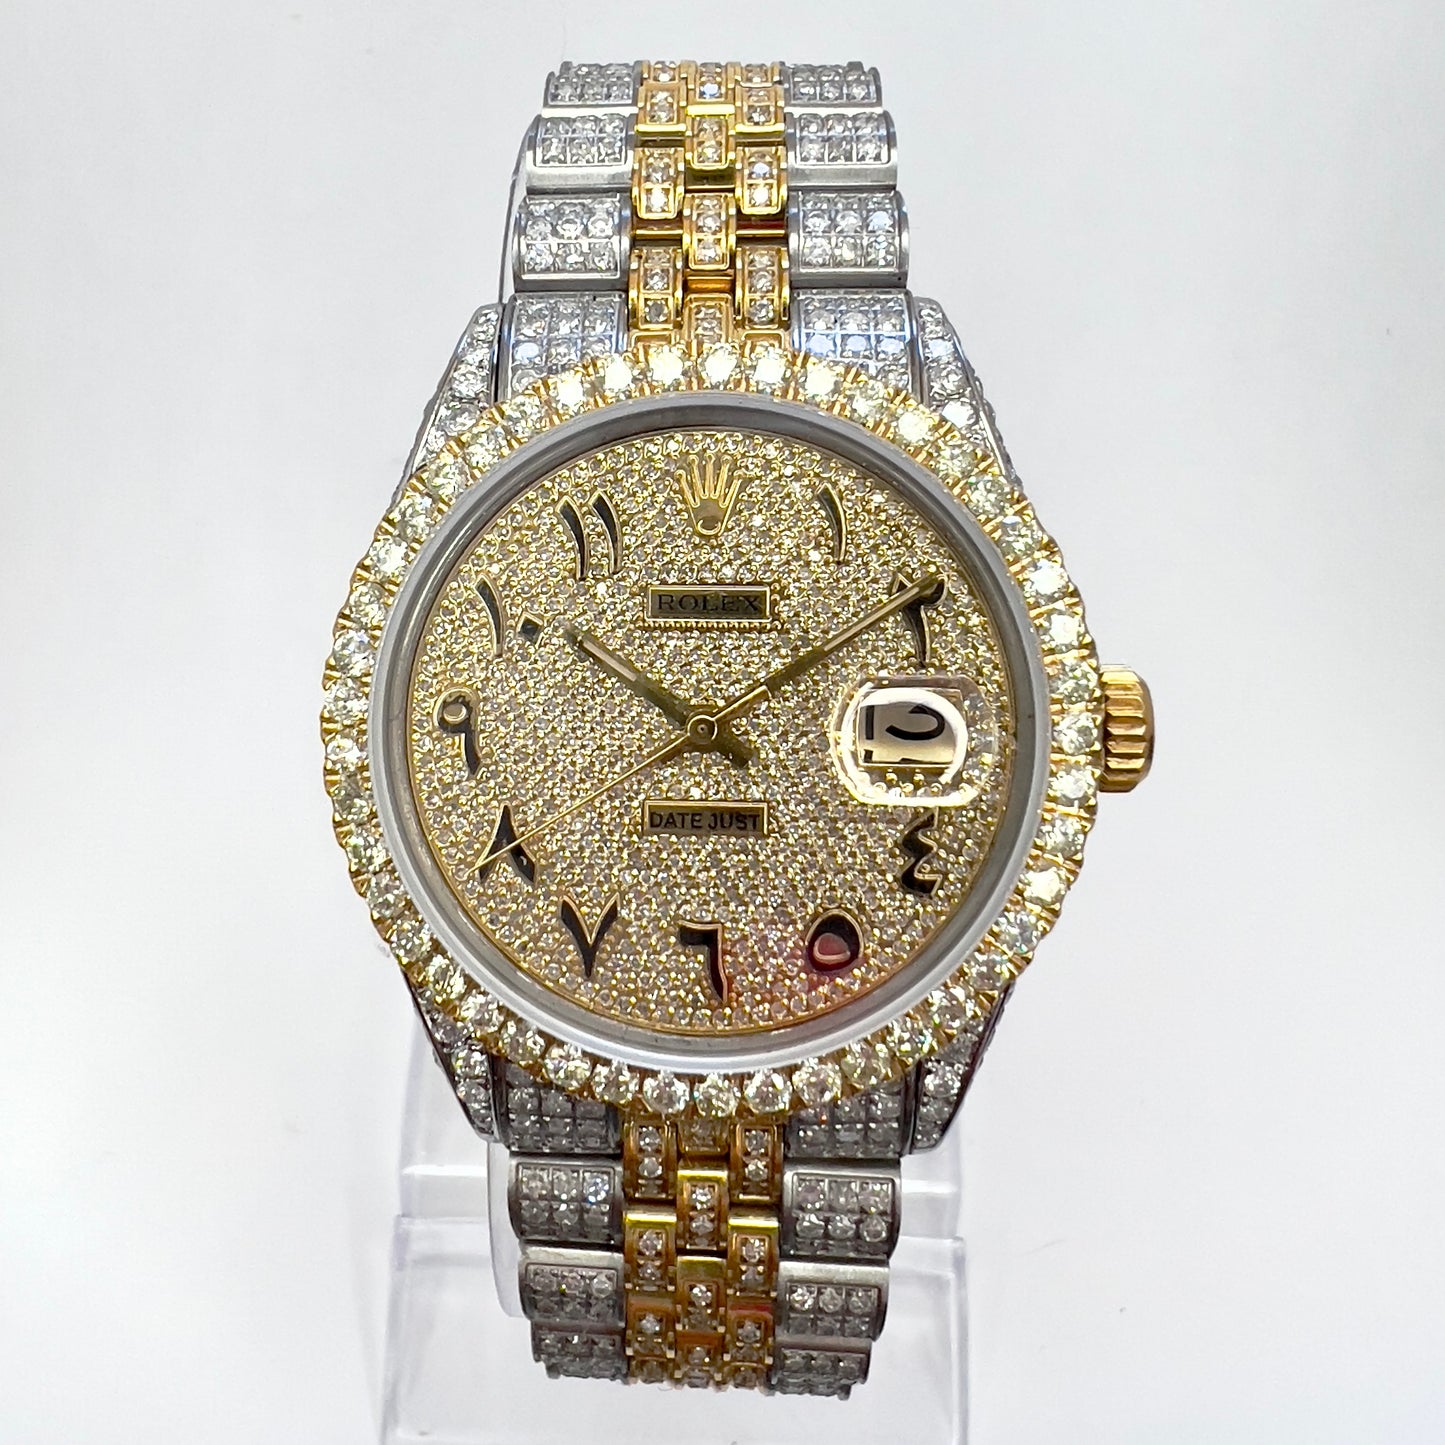 ROLEX Oyster Perpetual DATEJUST Automatic 36mm 2 Tone Full Diamond Watch